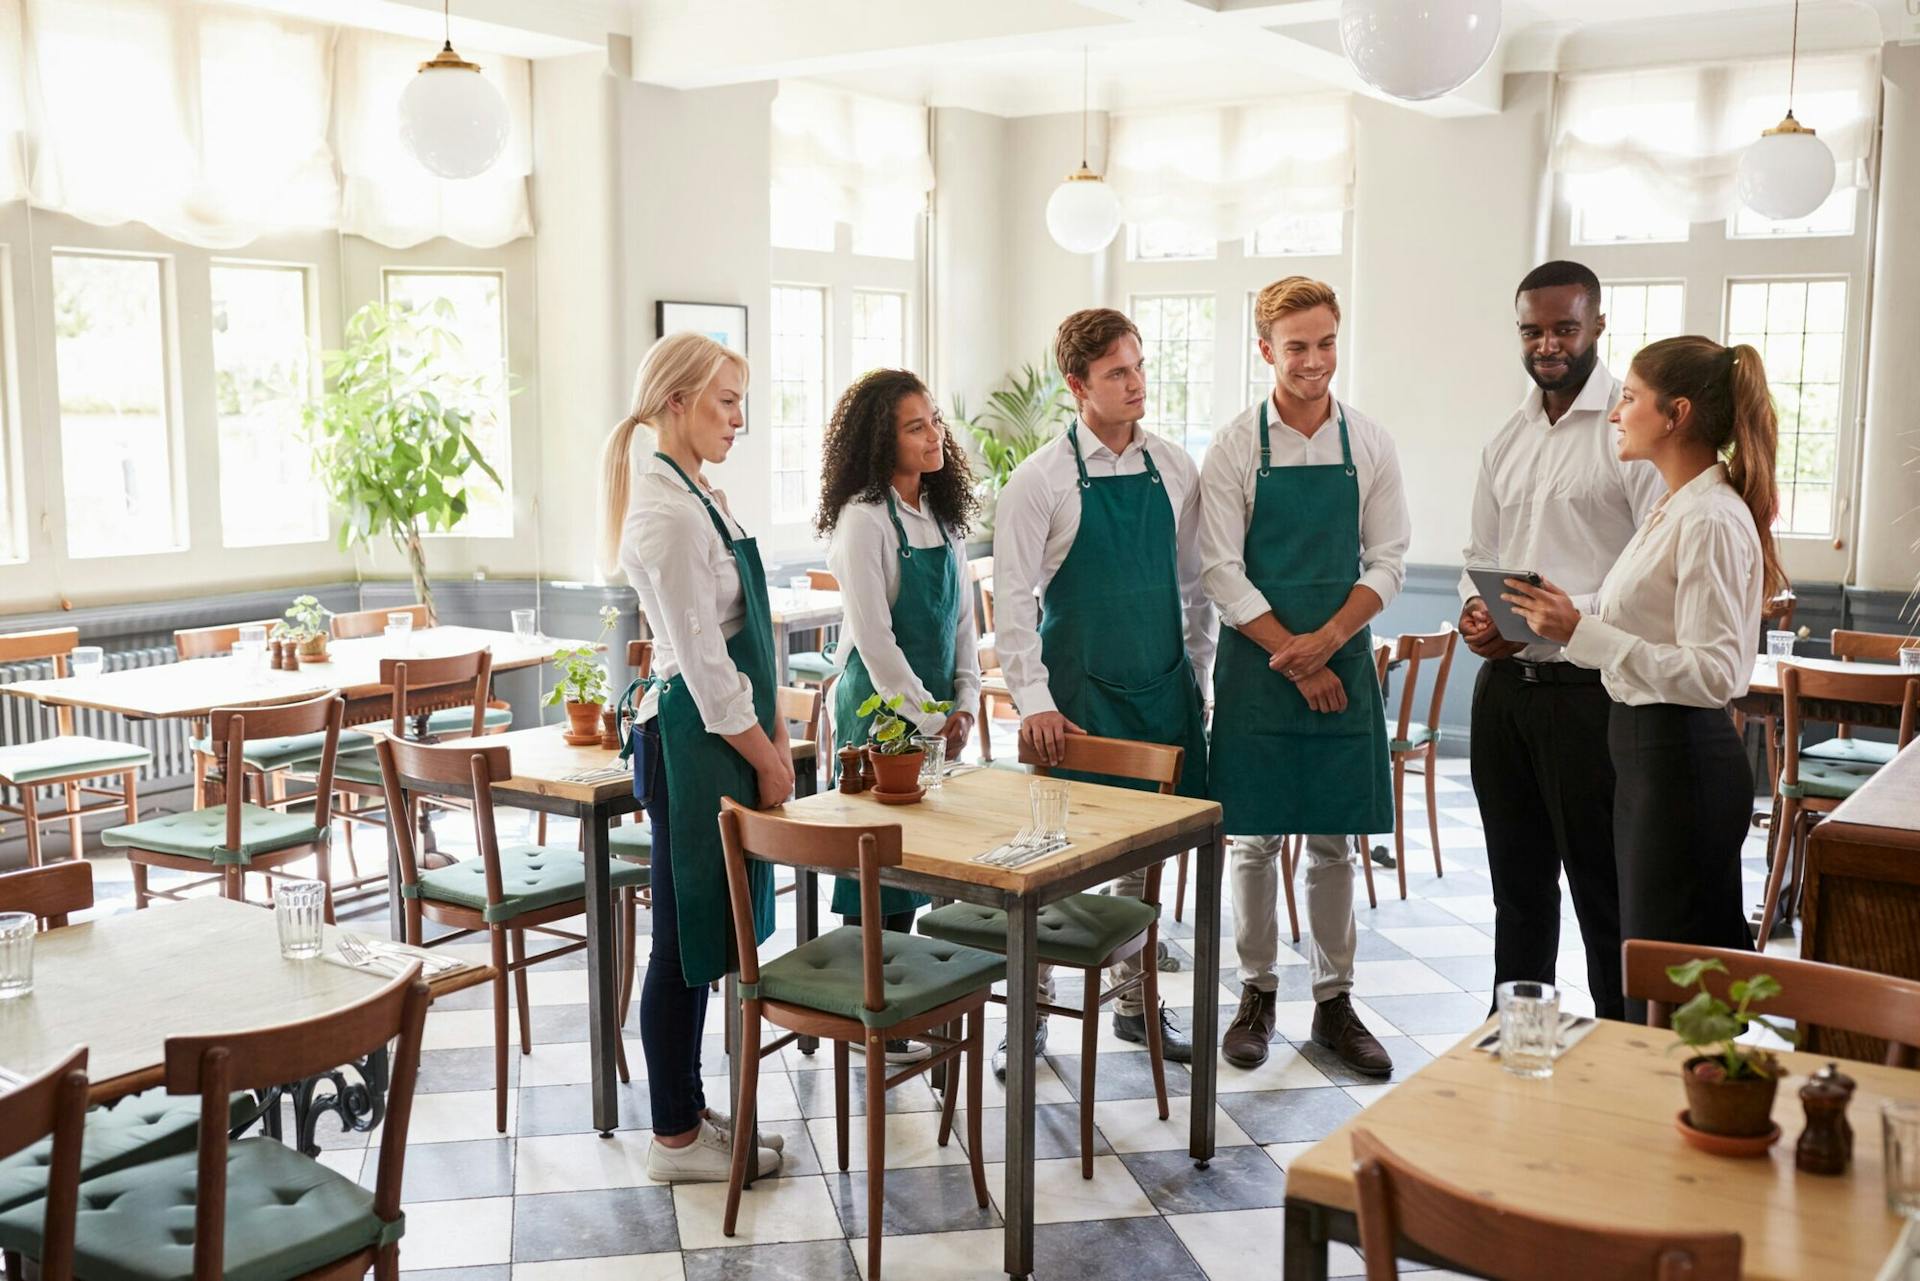 Restaurant Core Values: How to Identify and Develop Them